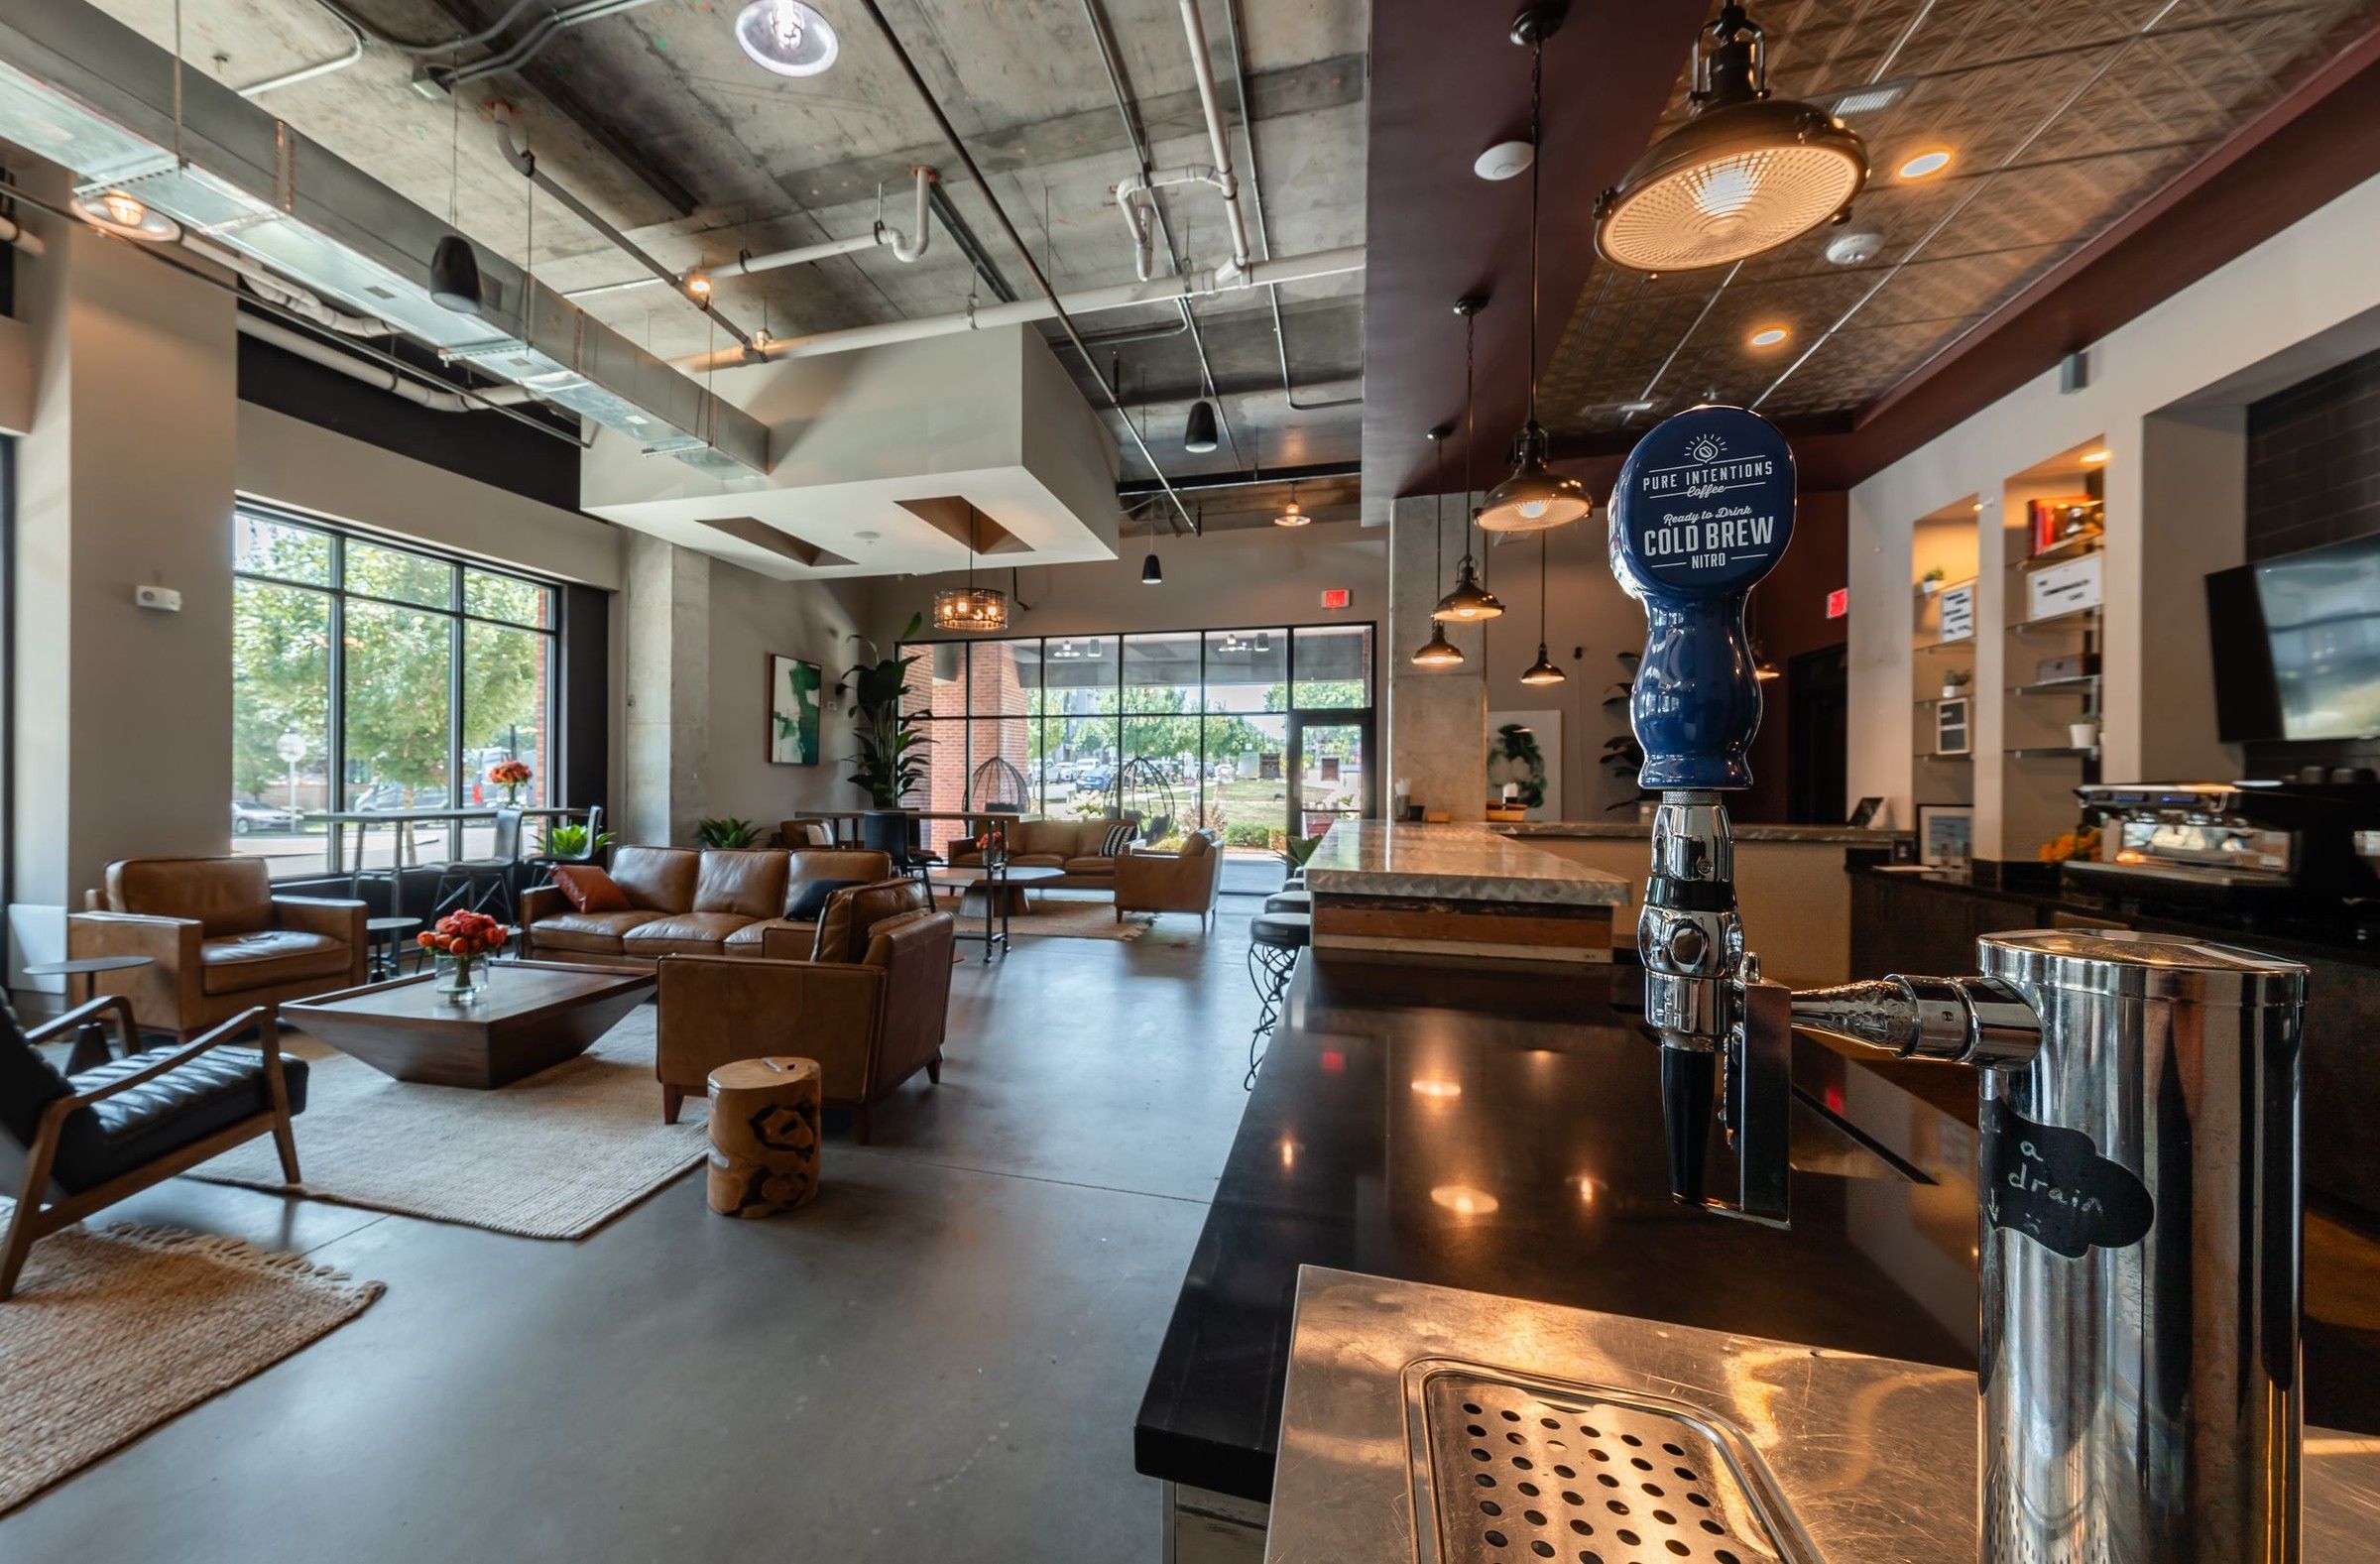 The Village at Commonwealth resident lounge and coffee bar with cold brew tap